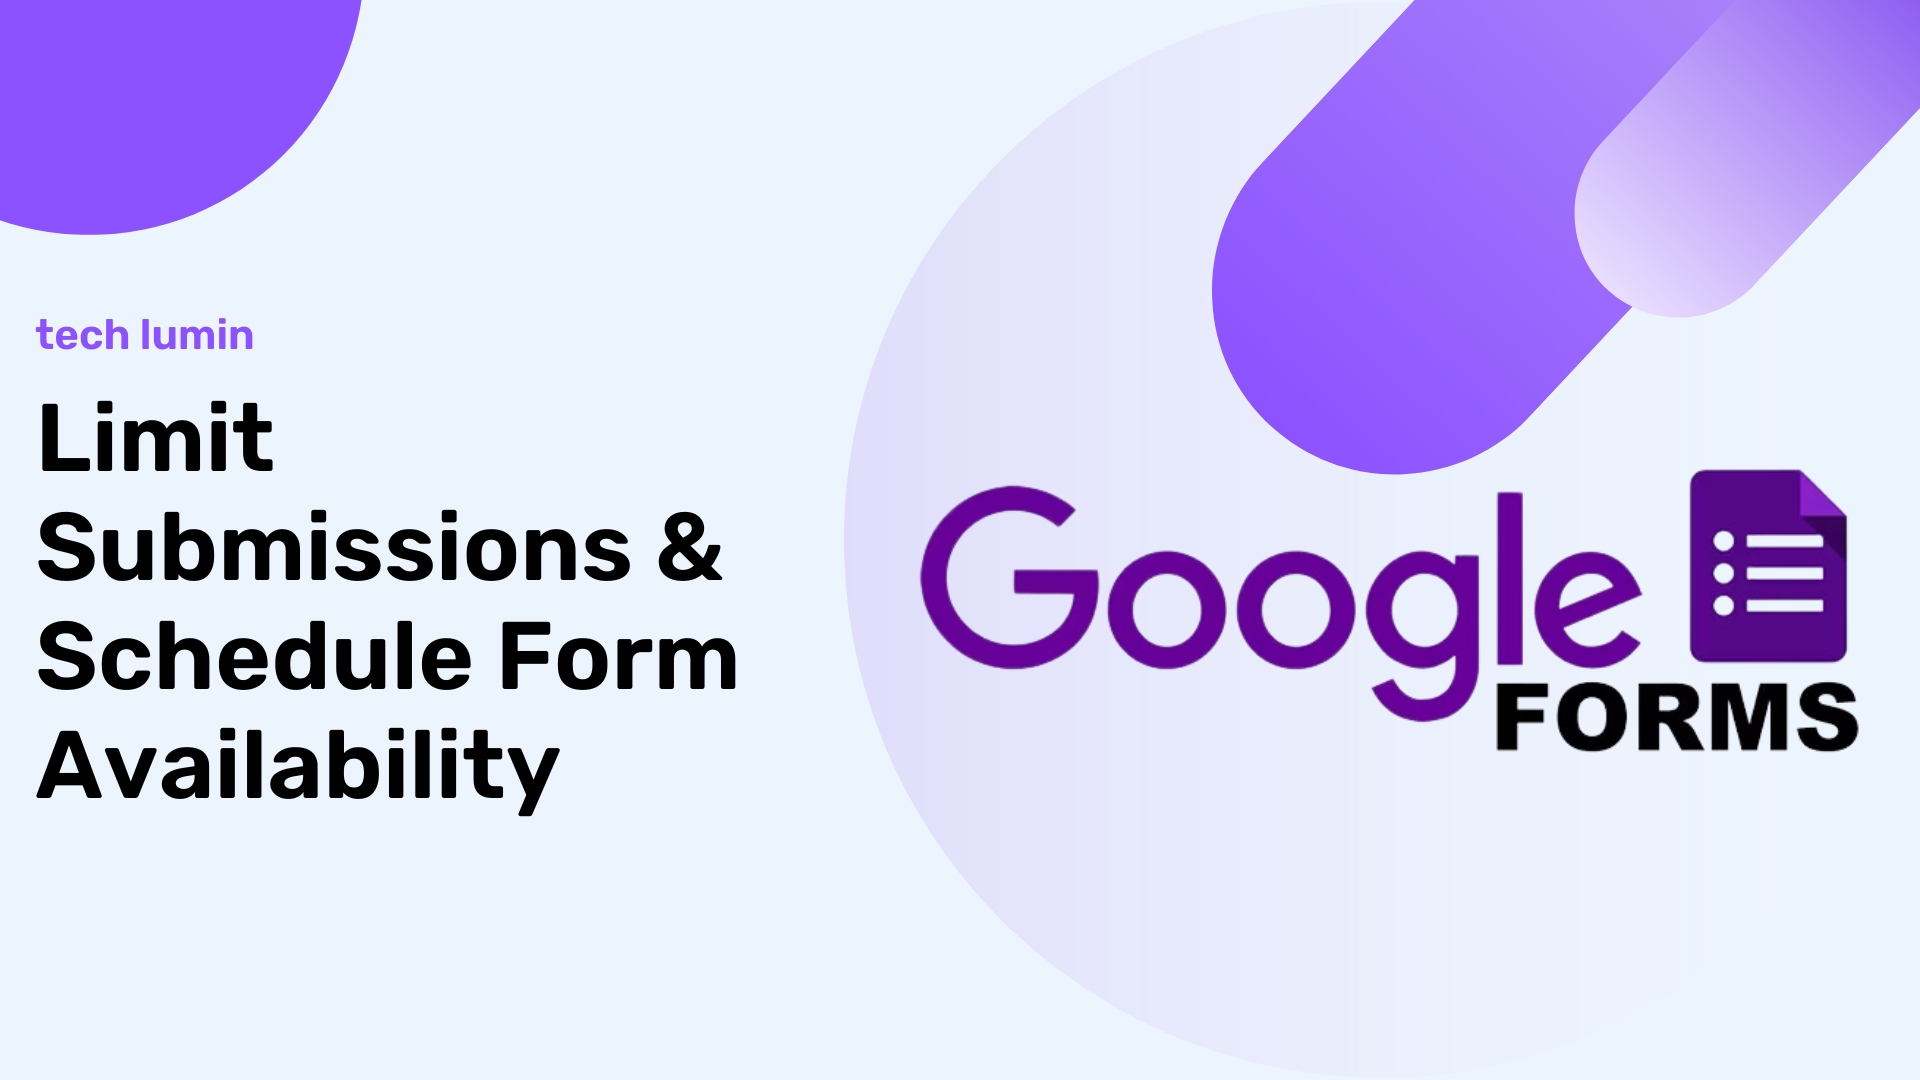 Google Forms-How to Limit Submissions and Schedule Form Availability in Google Forms